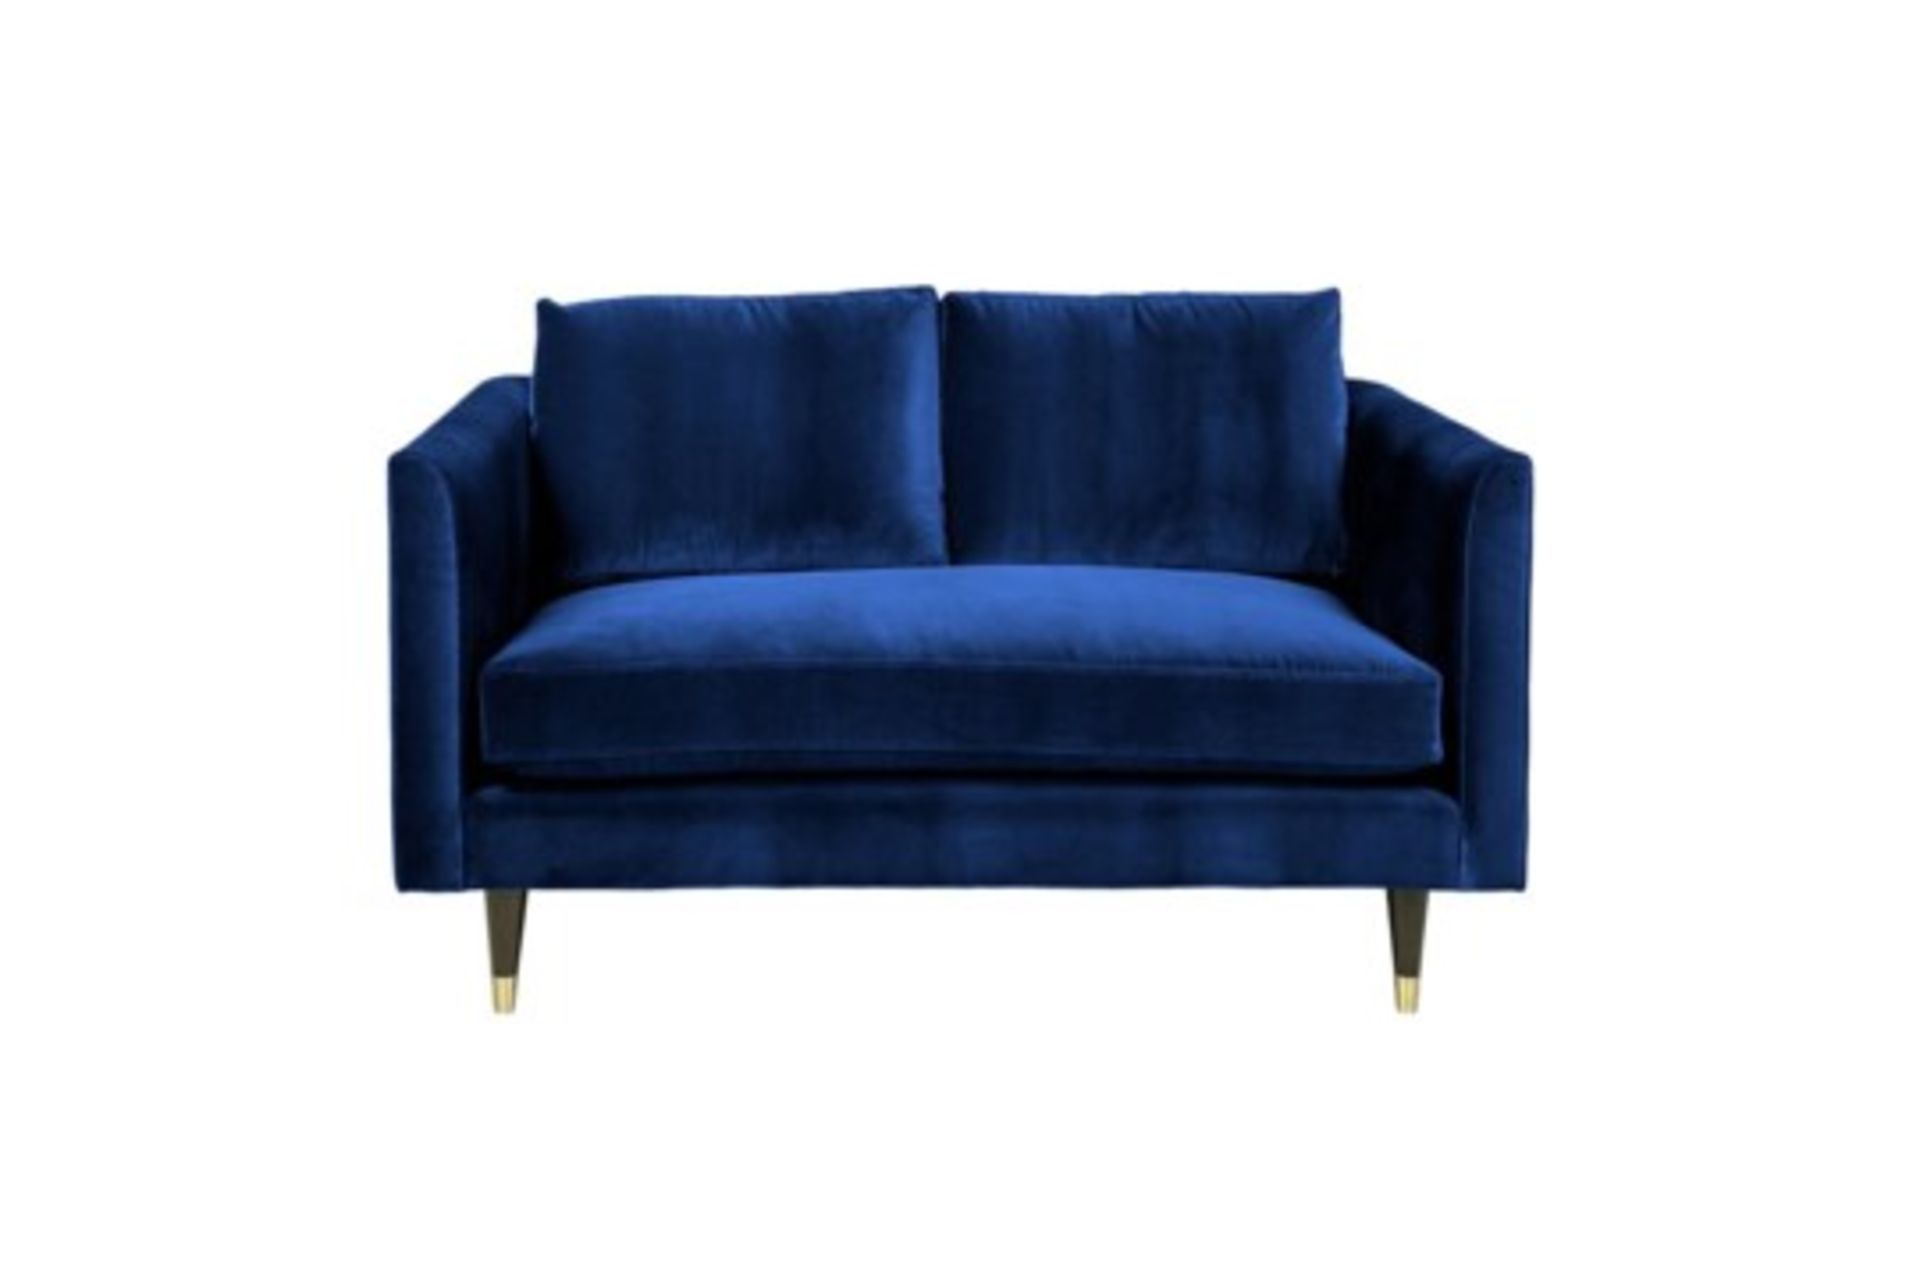 Henry Two Seater Velvet Sofa - Royal Blue Henry is a contemporary sofa collection with classic - Image 2 of 3